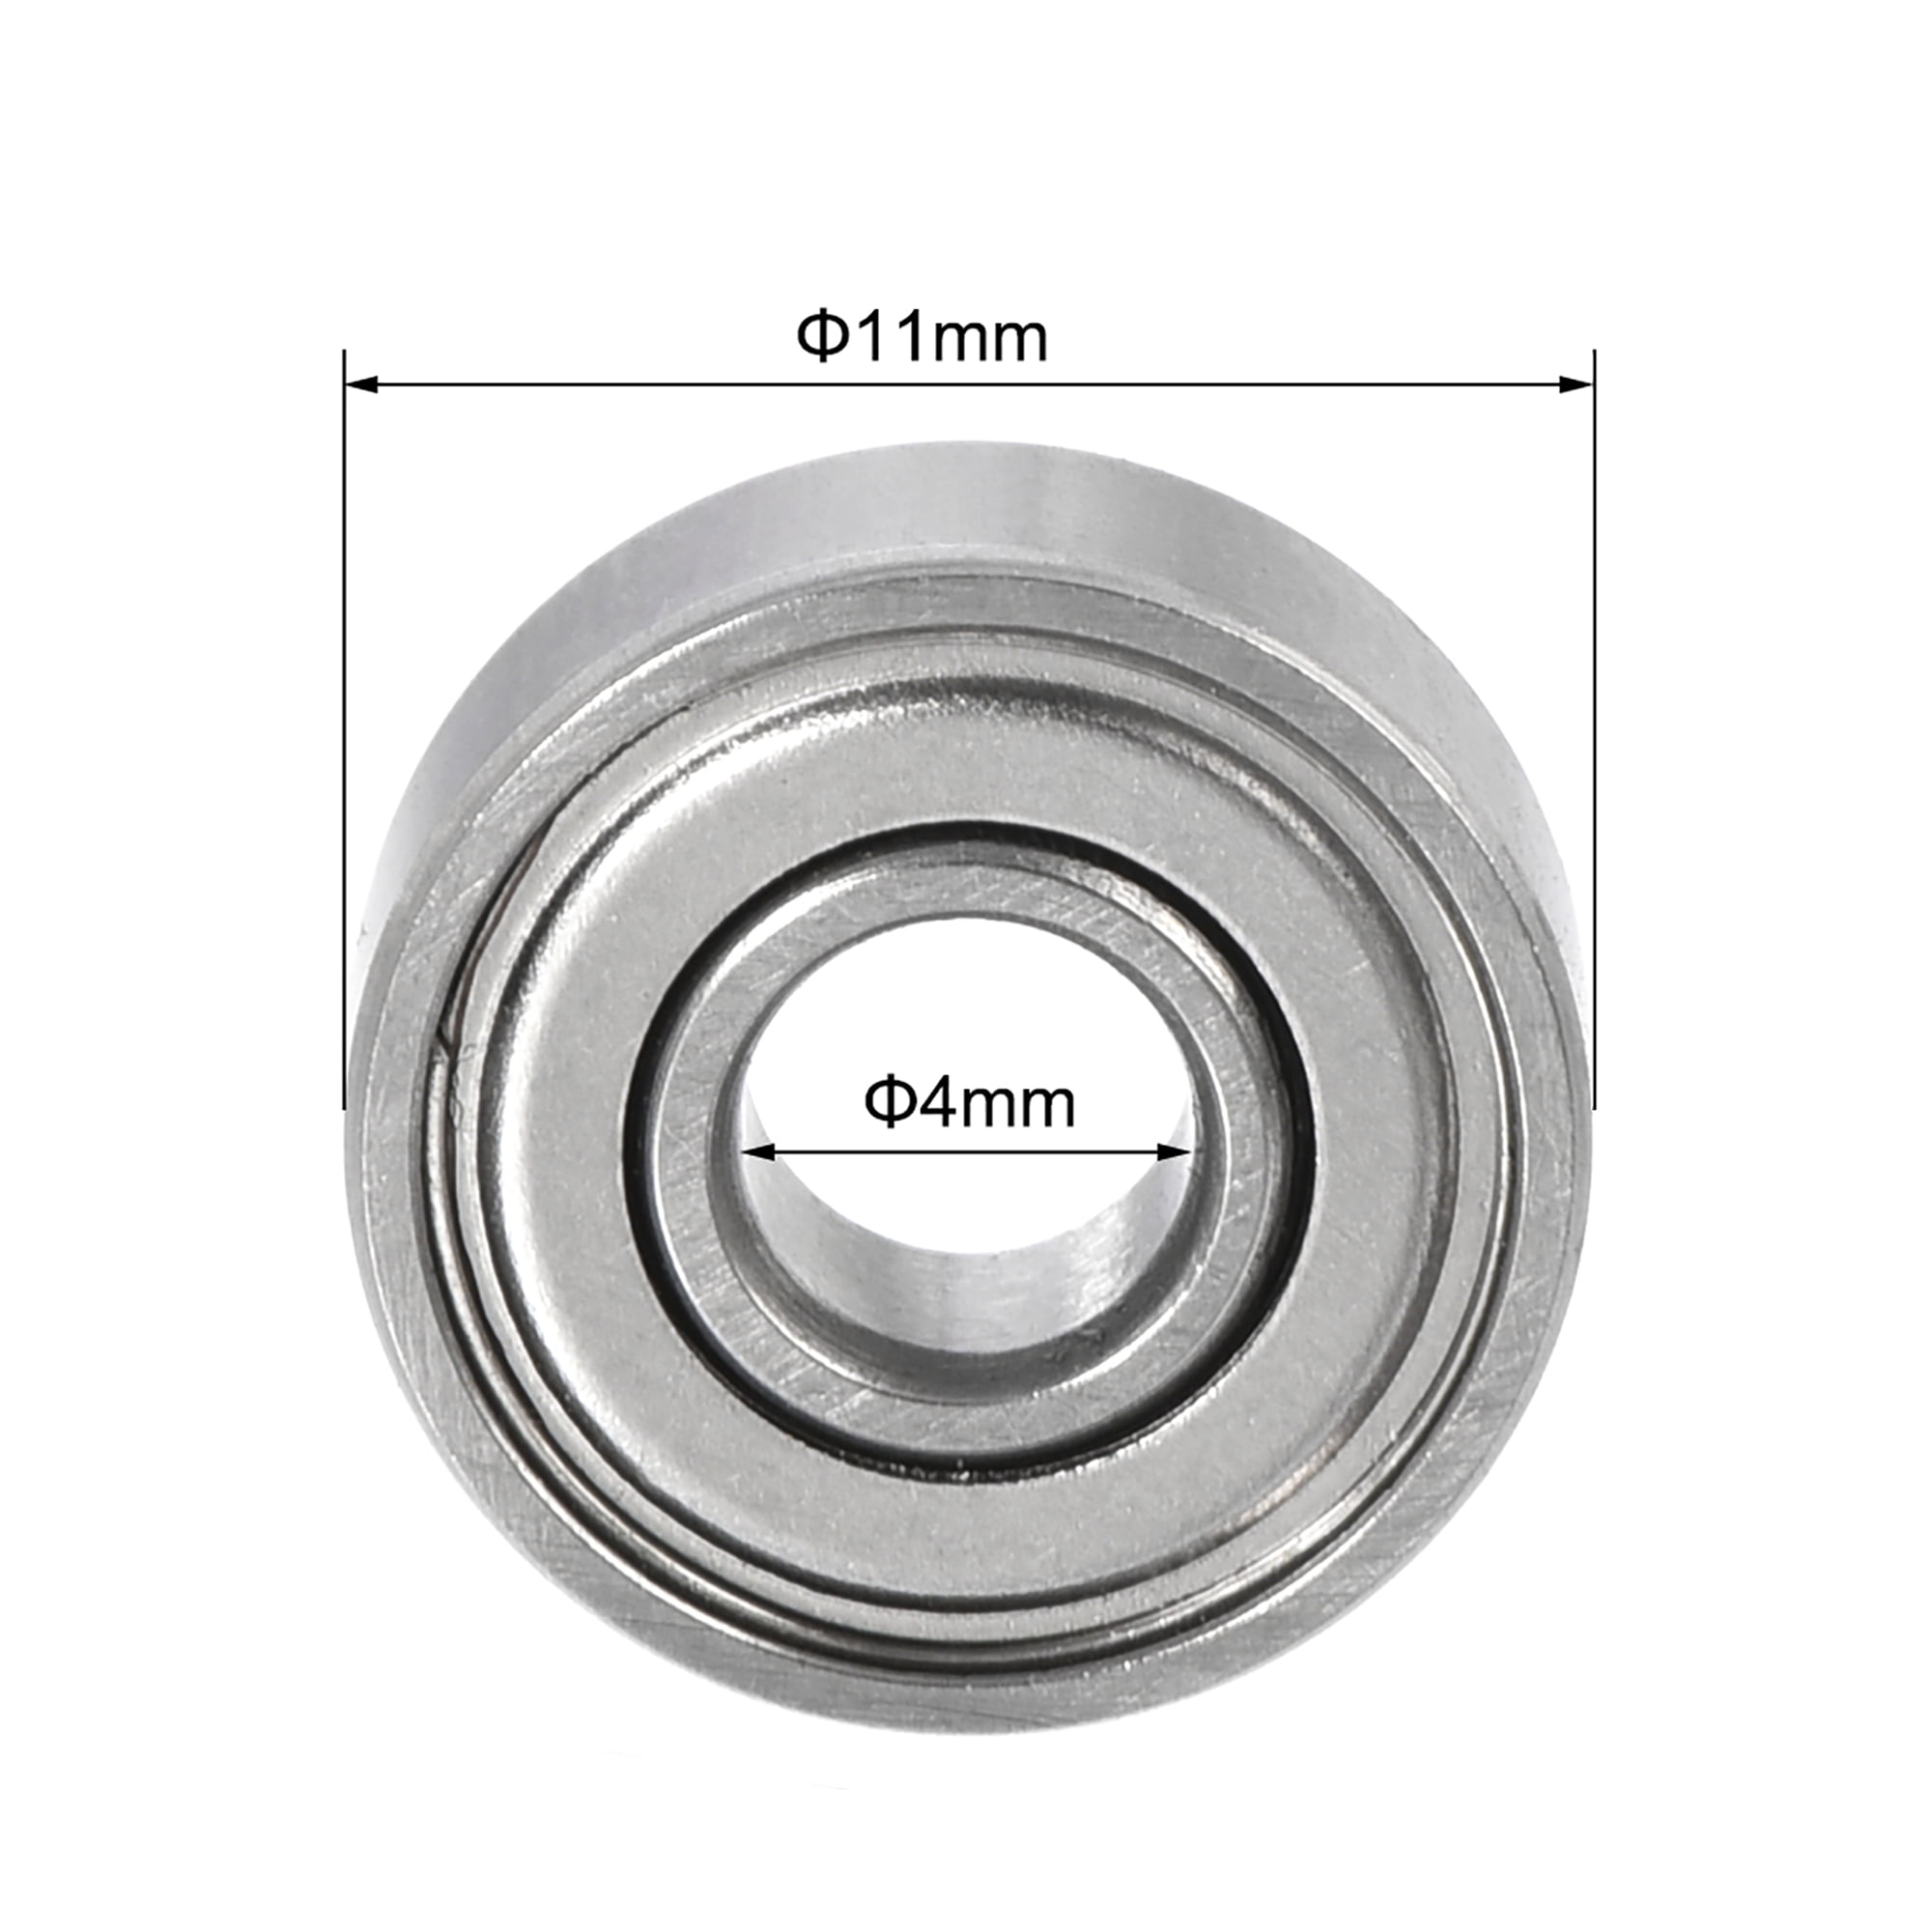 Details about   S694ZZ Stainless Steel Ball Bearing 4x11x4mm Double Shielded S682 Bearings 2pcs 